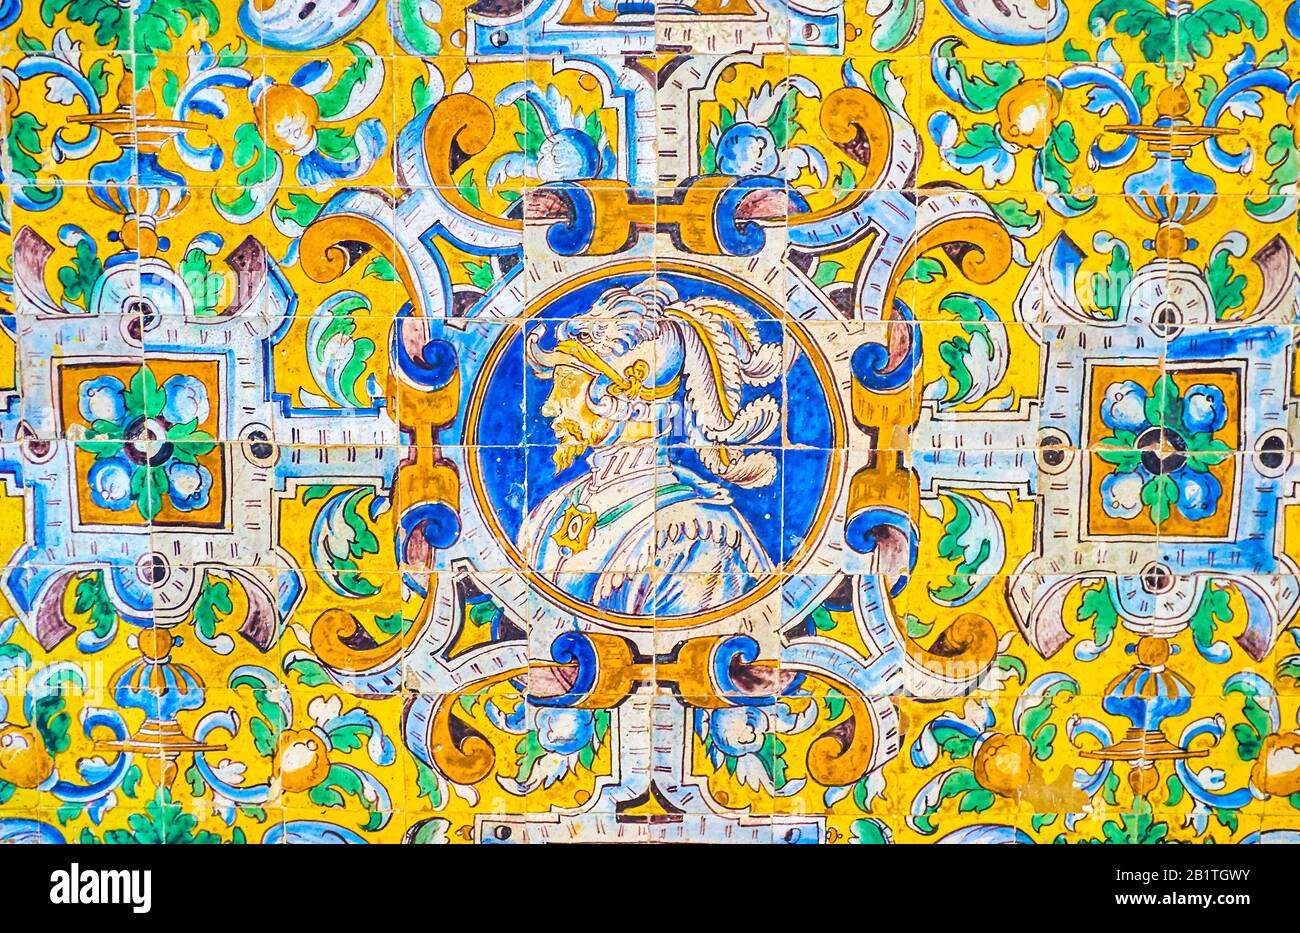 The amazing glazed tiled wall on Alcazar Palace complex depicting the face of the knight in armot surrounded with floral ornament, Seville, Spain Stock Photo